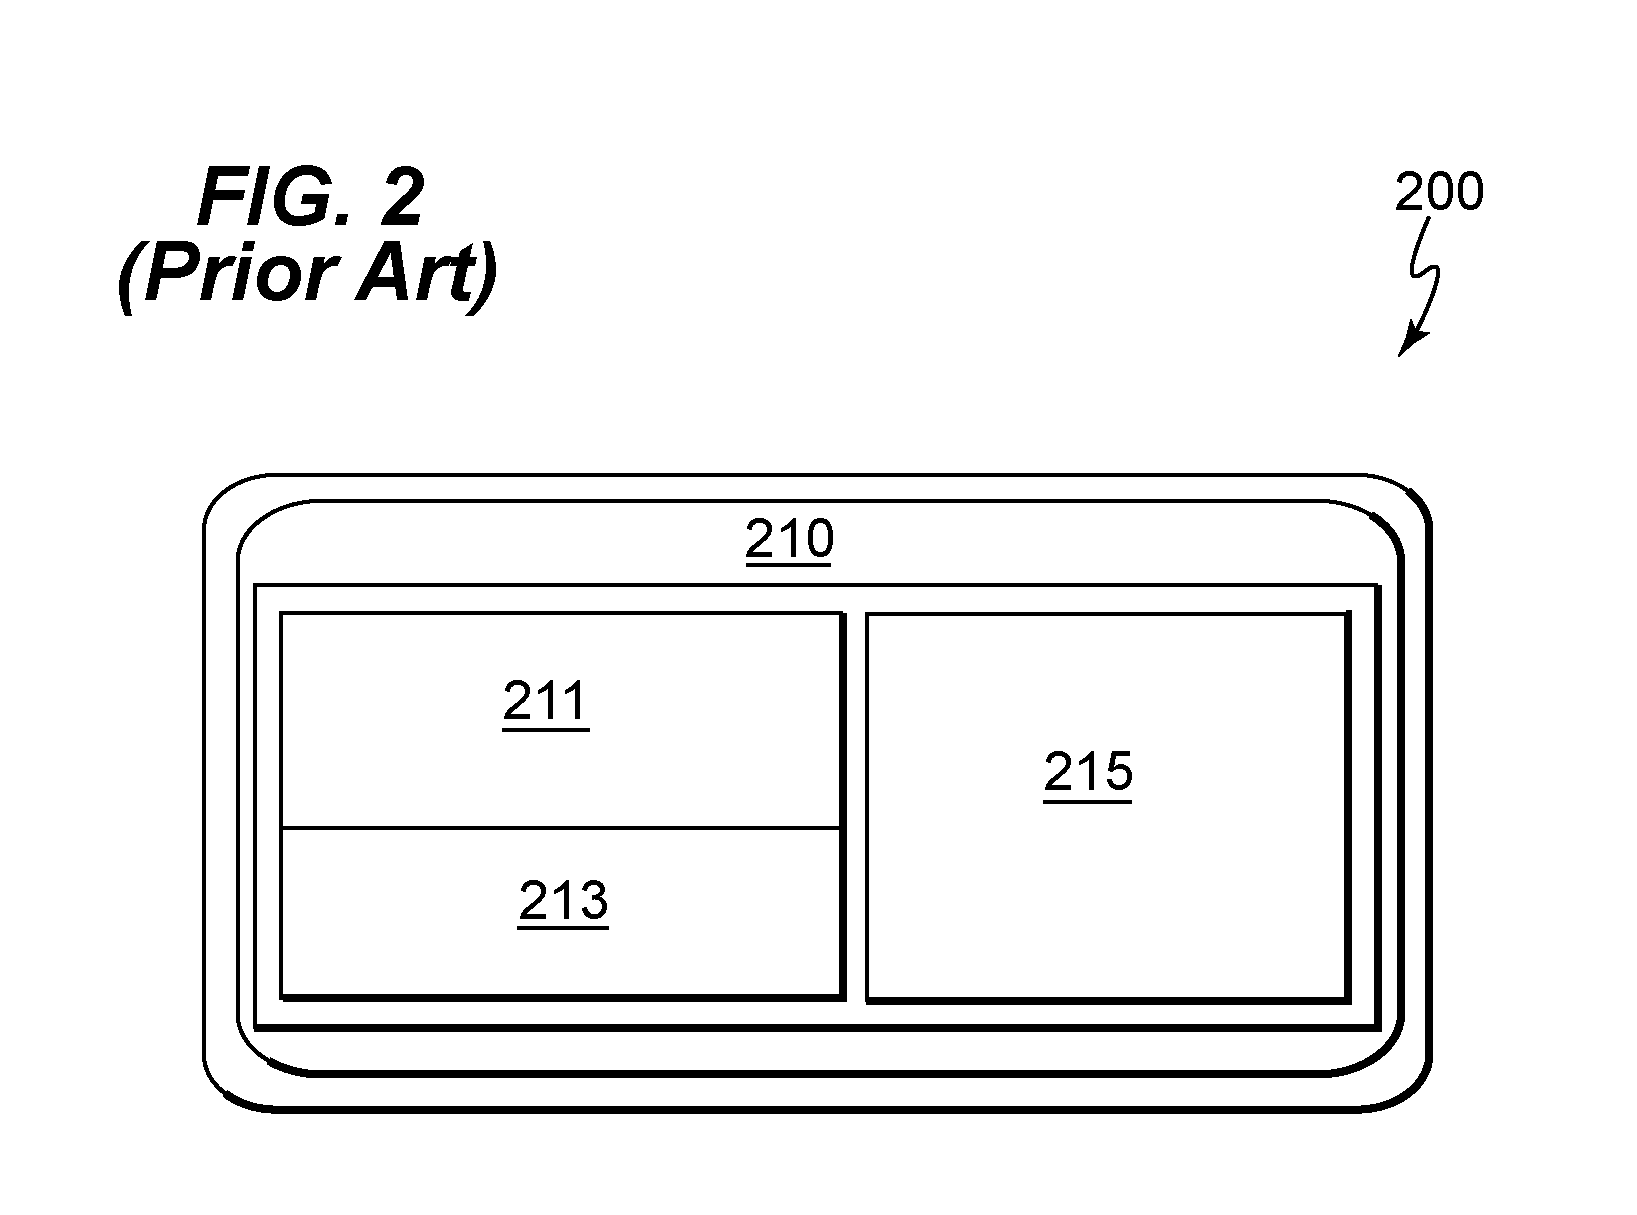 Physical access control system with smartcard and methods of operating